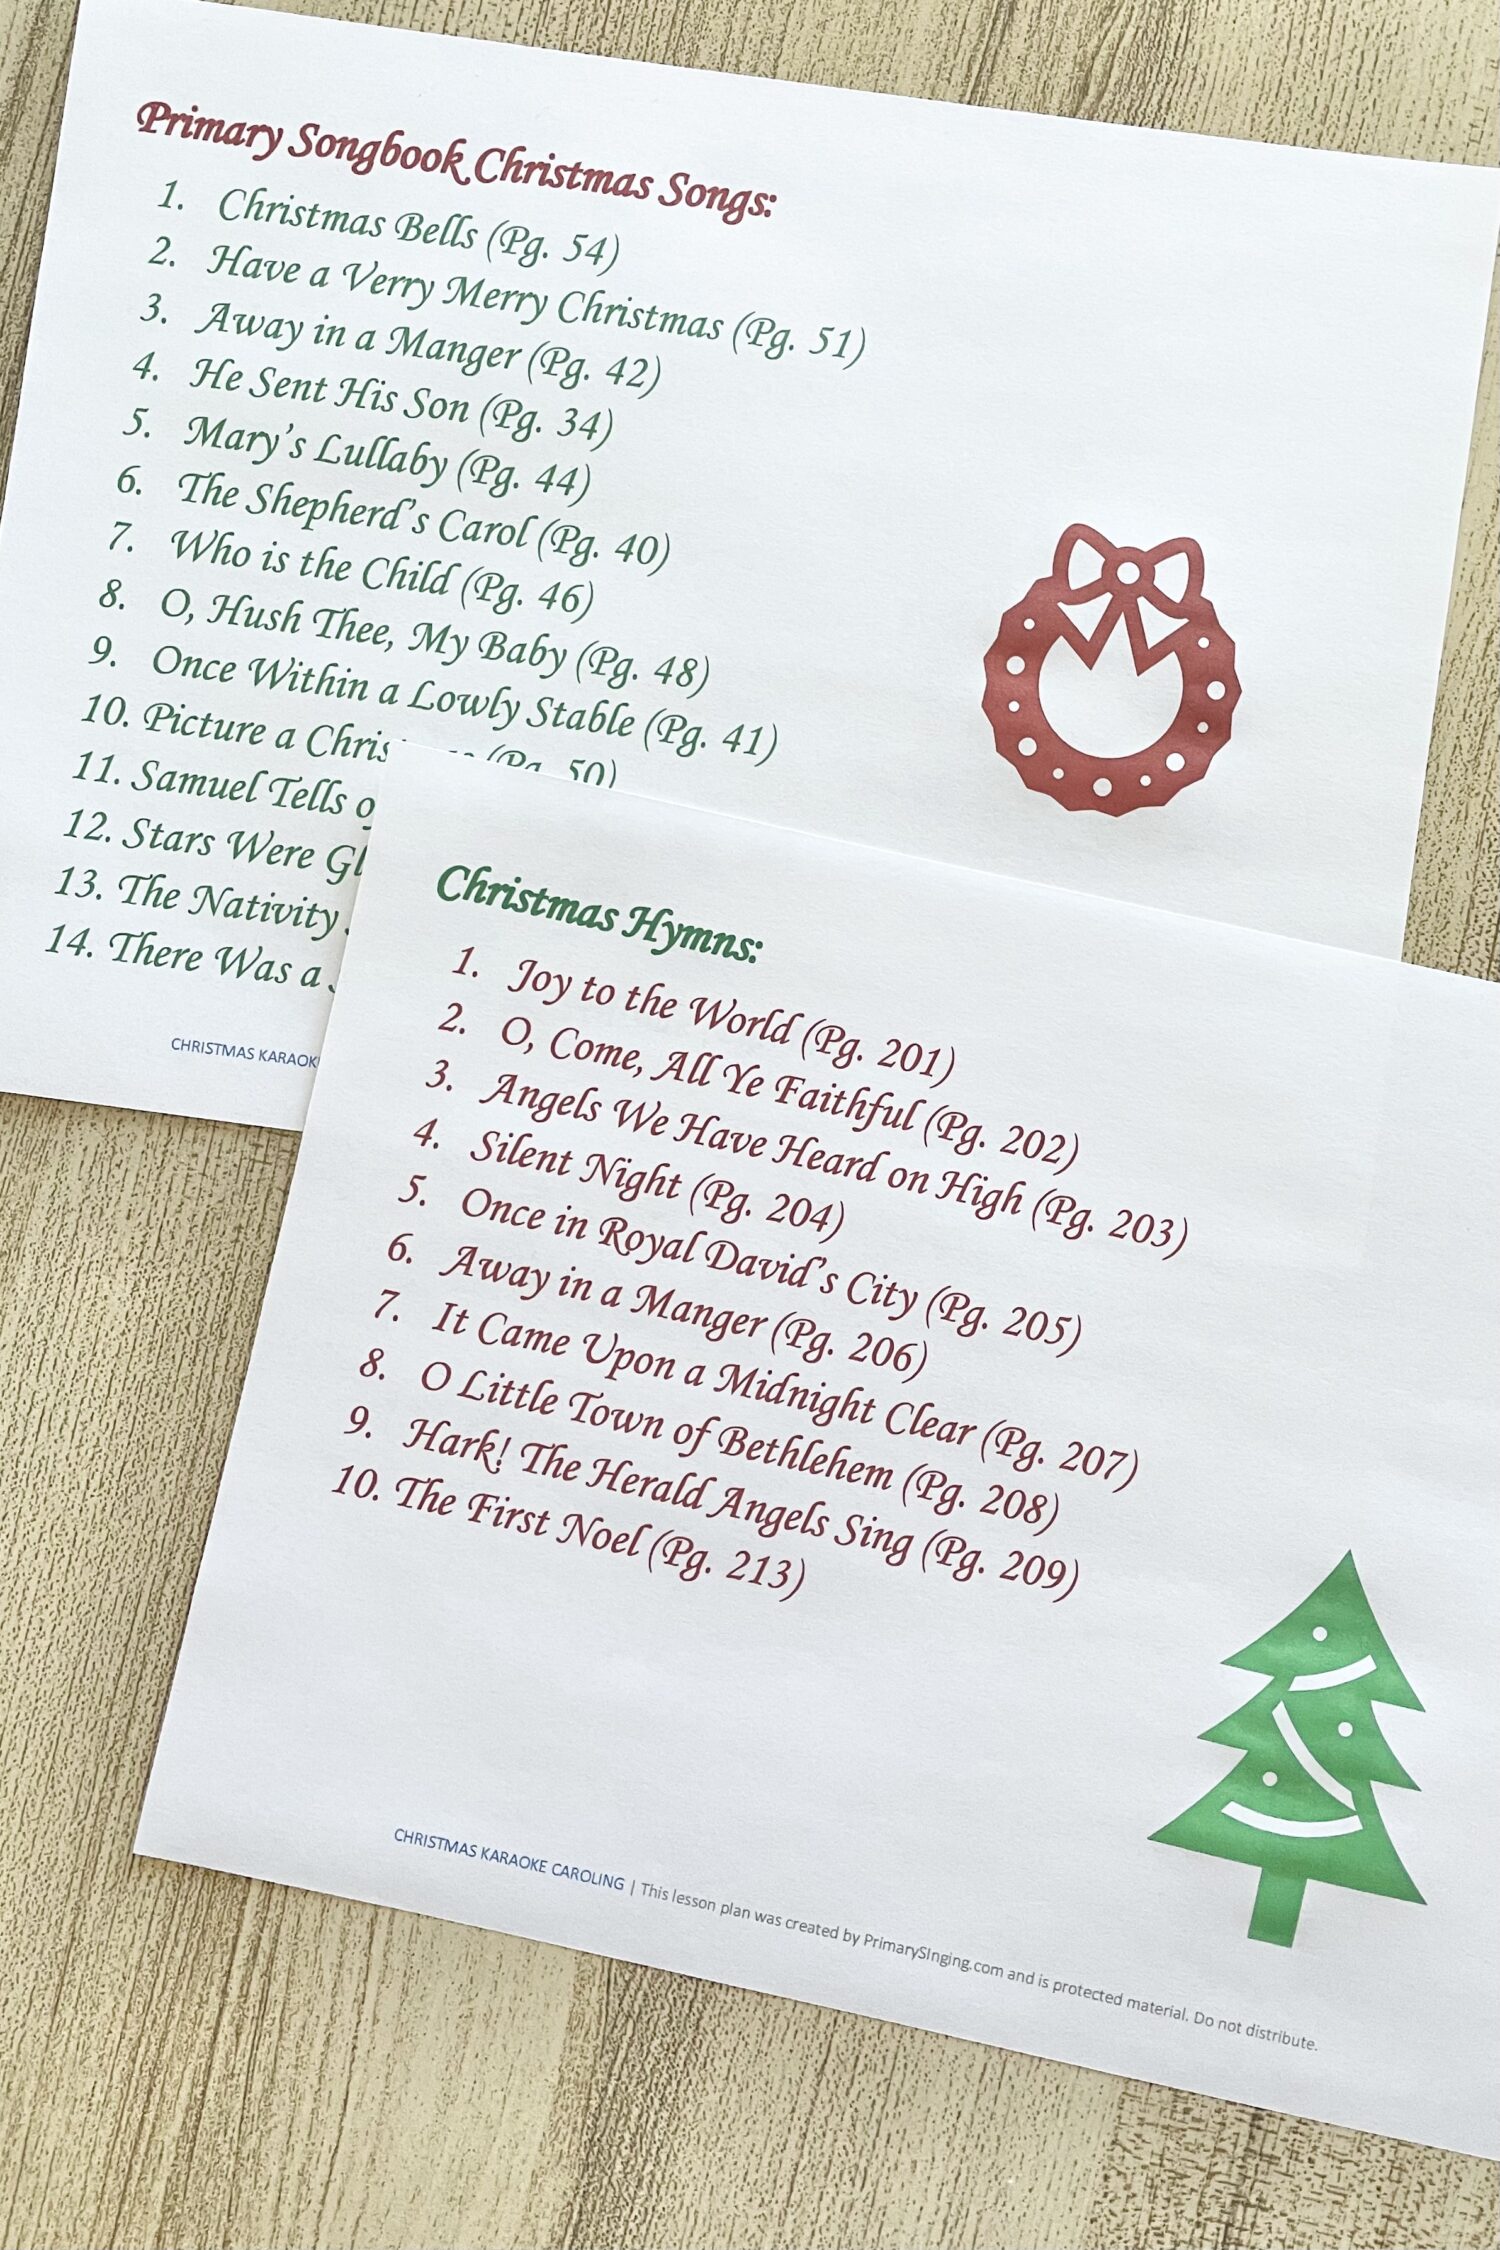 Christmas Karaoke Caroling - Use this fun Christmas singing time idea and sing familiar carols as a primary with song helps for LDS Primary Music Leaders.